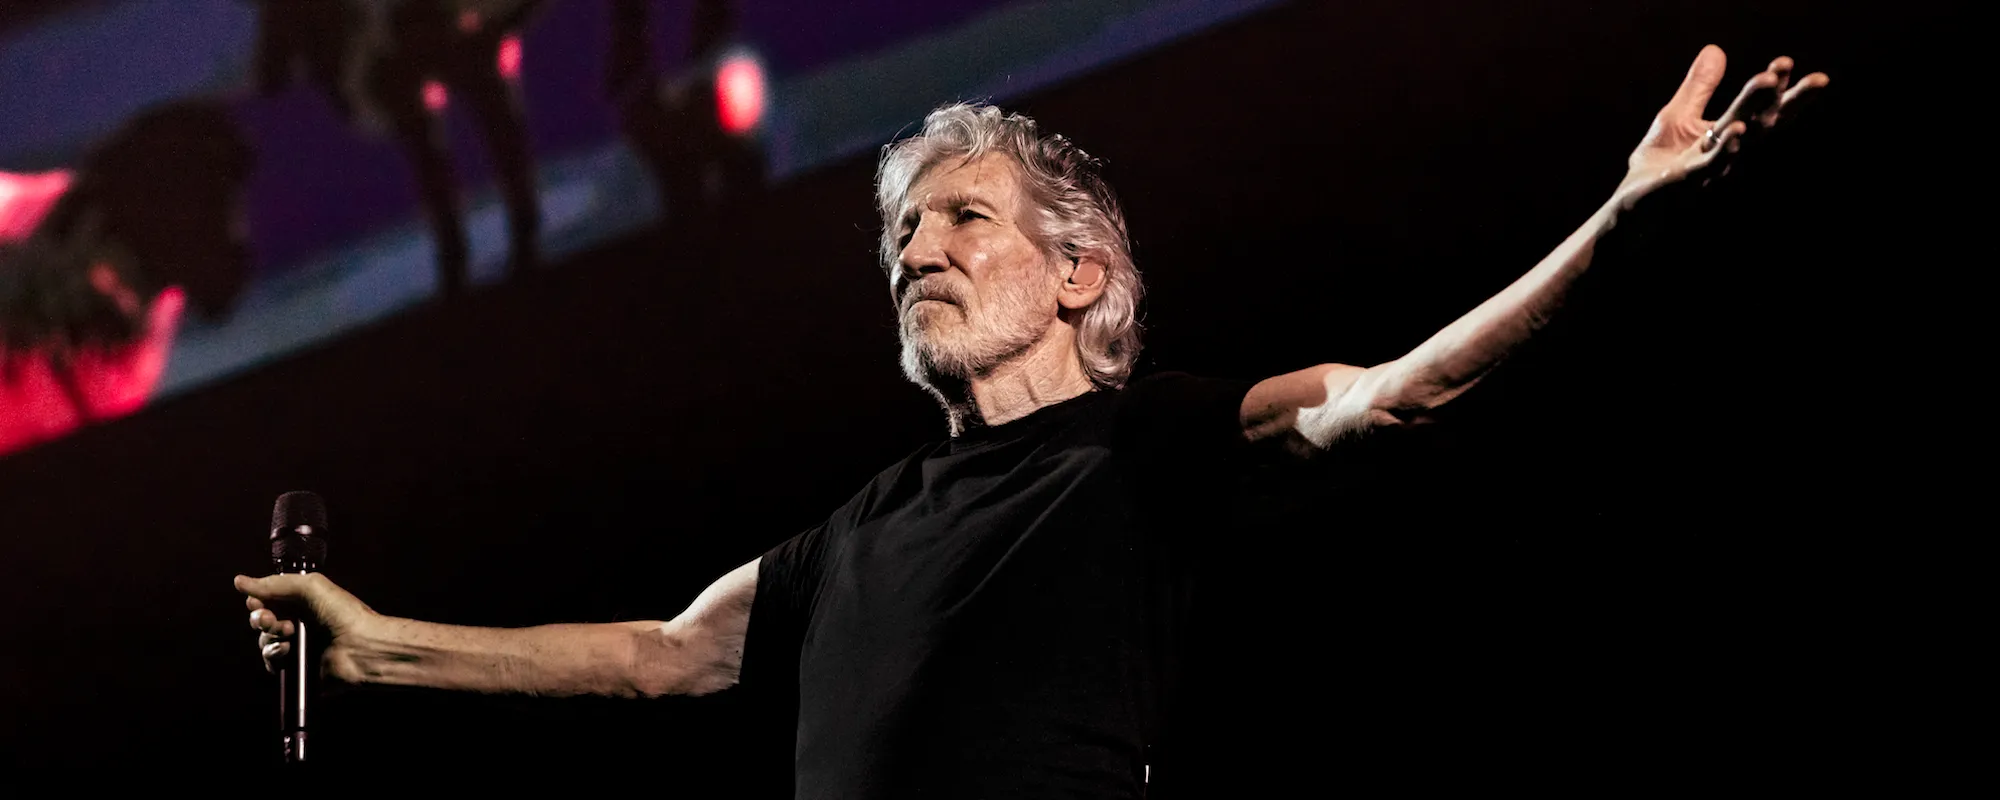 Update: Roger Waters Denies Poland Concert Cancellations Are Due to His Stance on the War in Ukraine